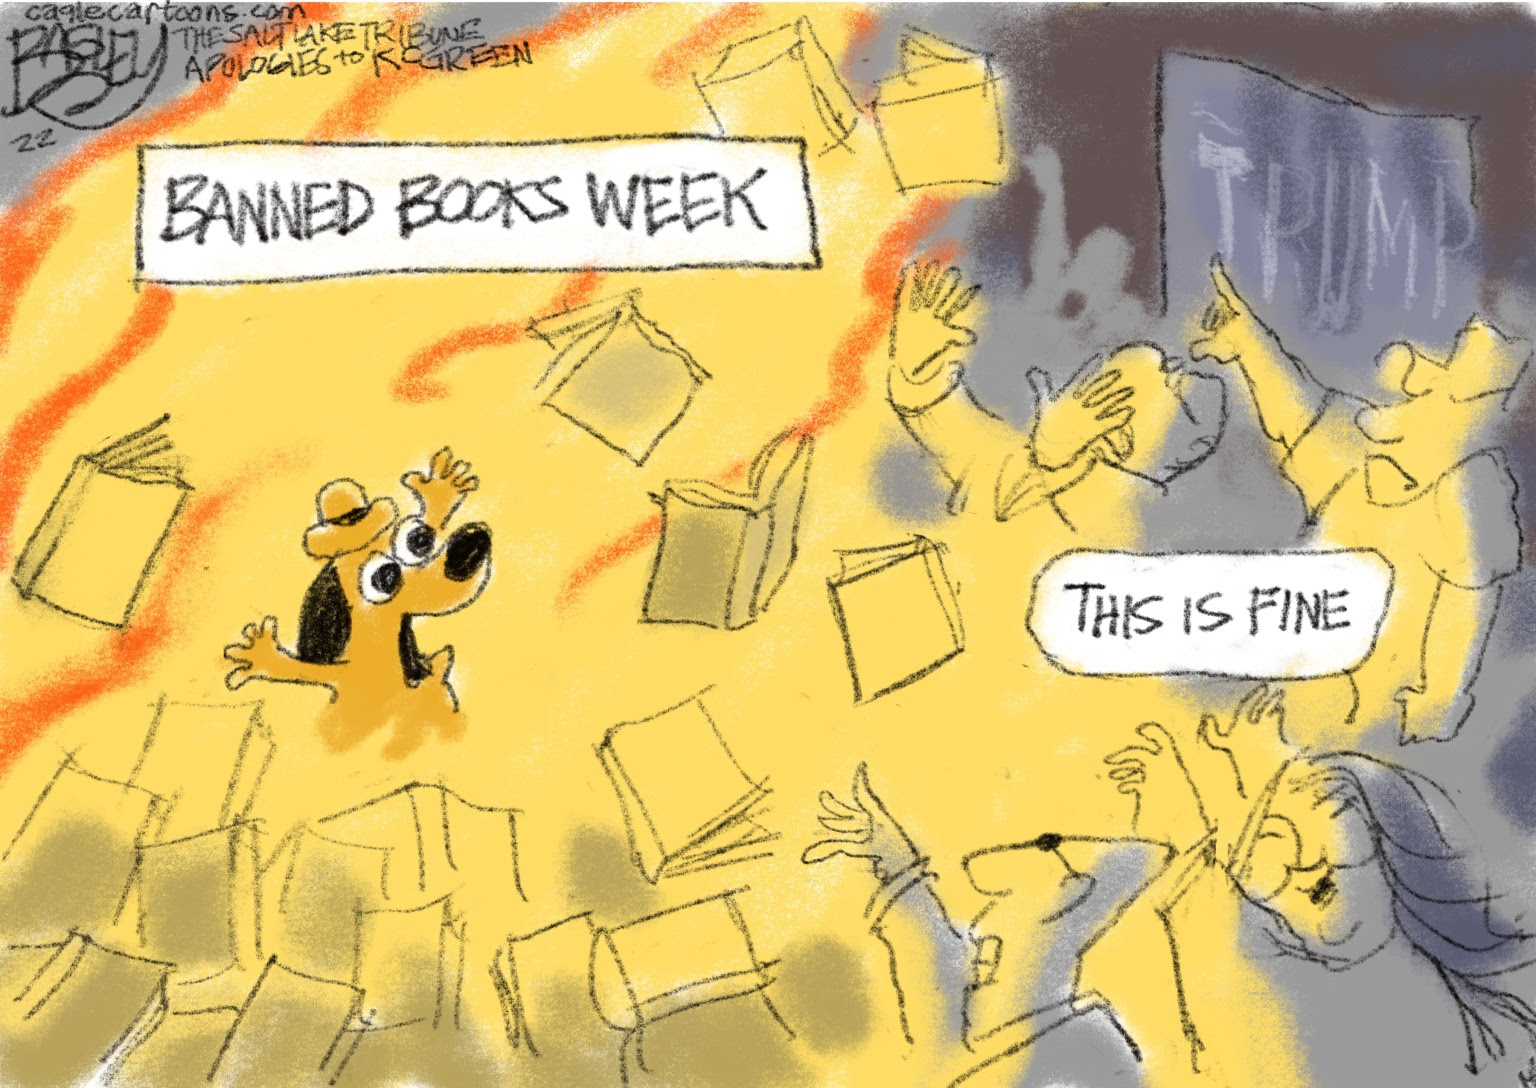 Republicans propose Nazi style book burnings to censor the freedom of speech